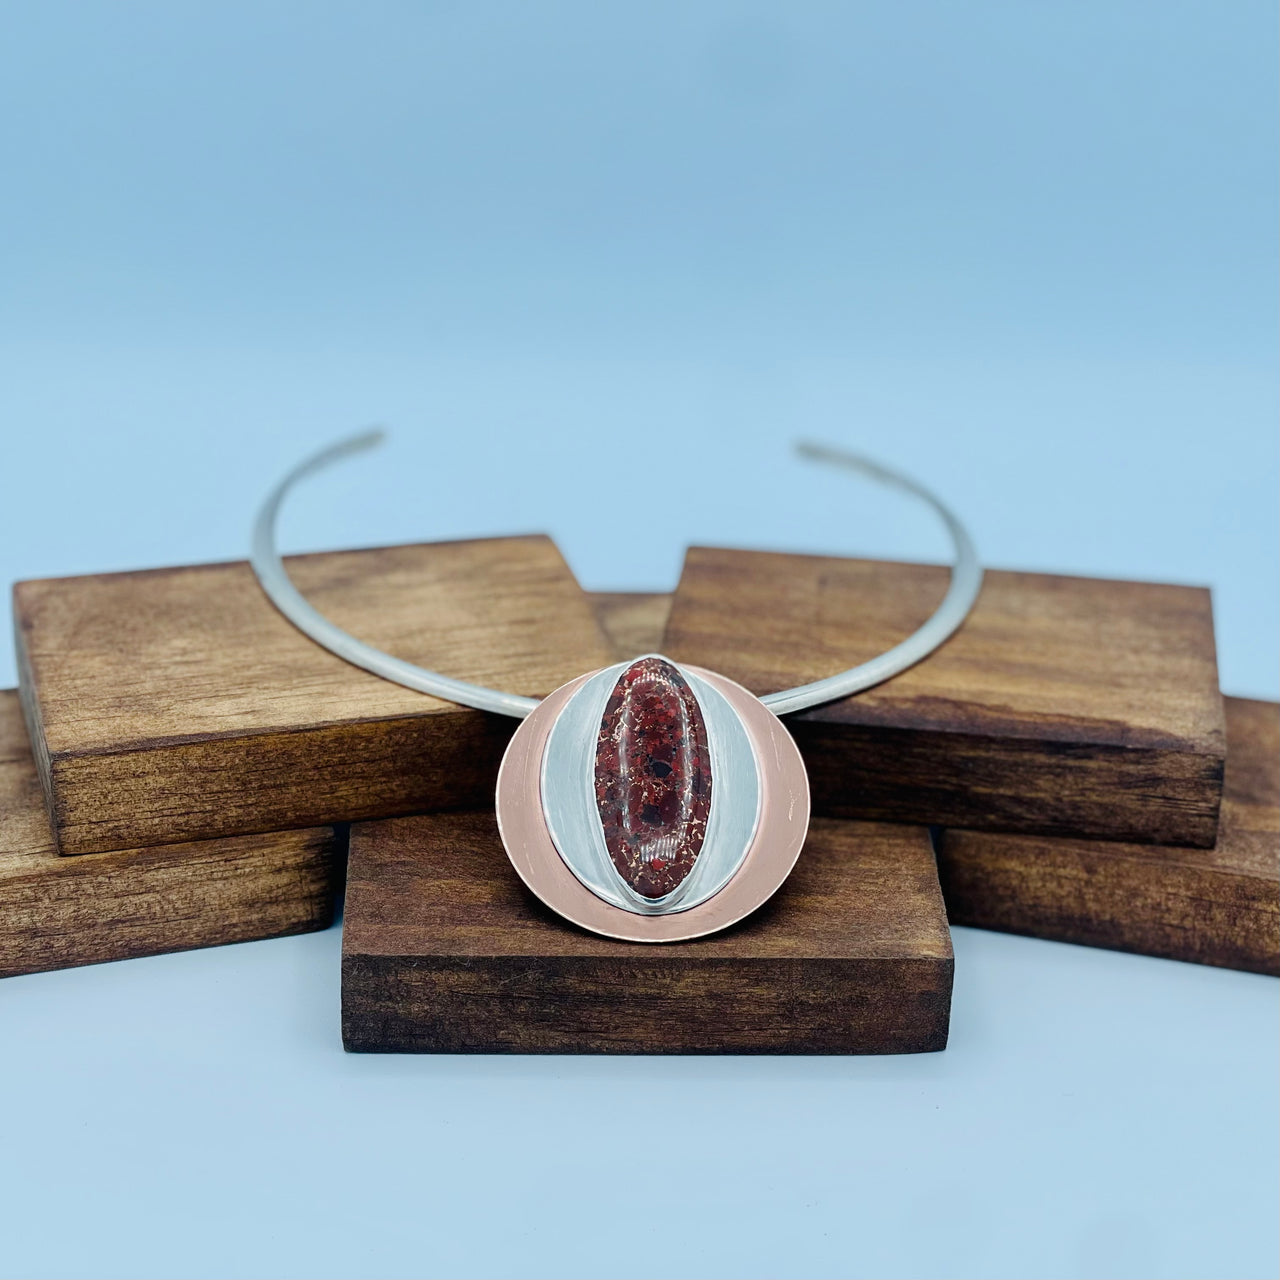 Layers of God (Copper Rose/ Kingston Conglomerate Pendant and Collar)